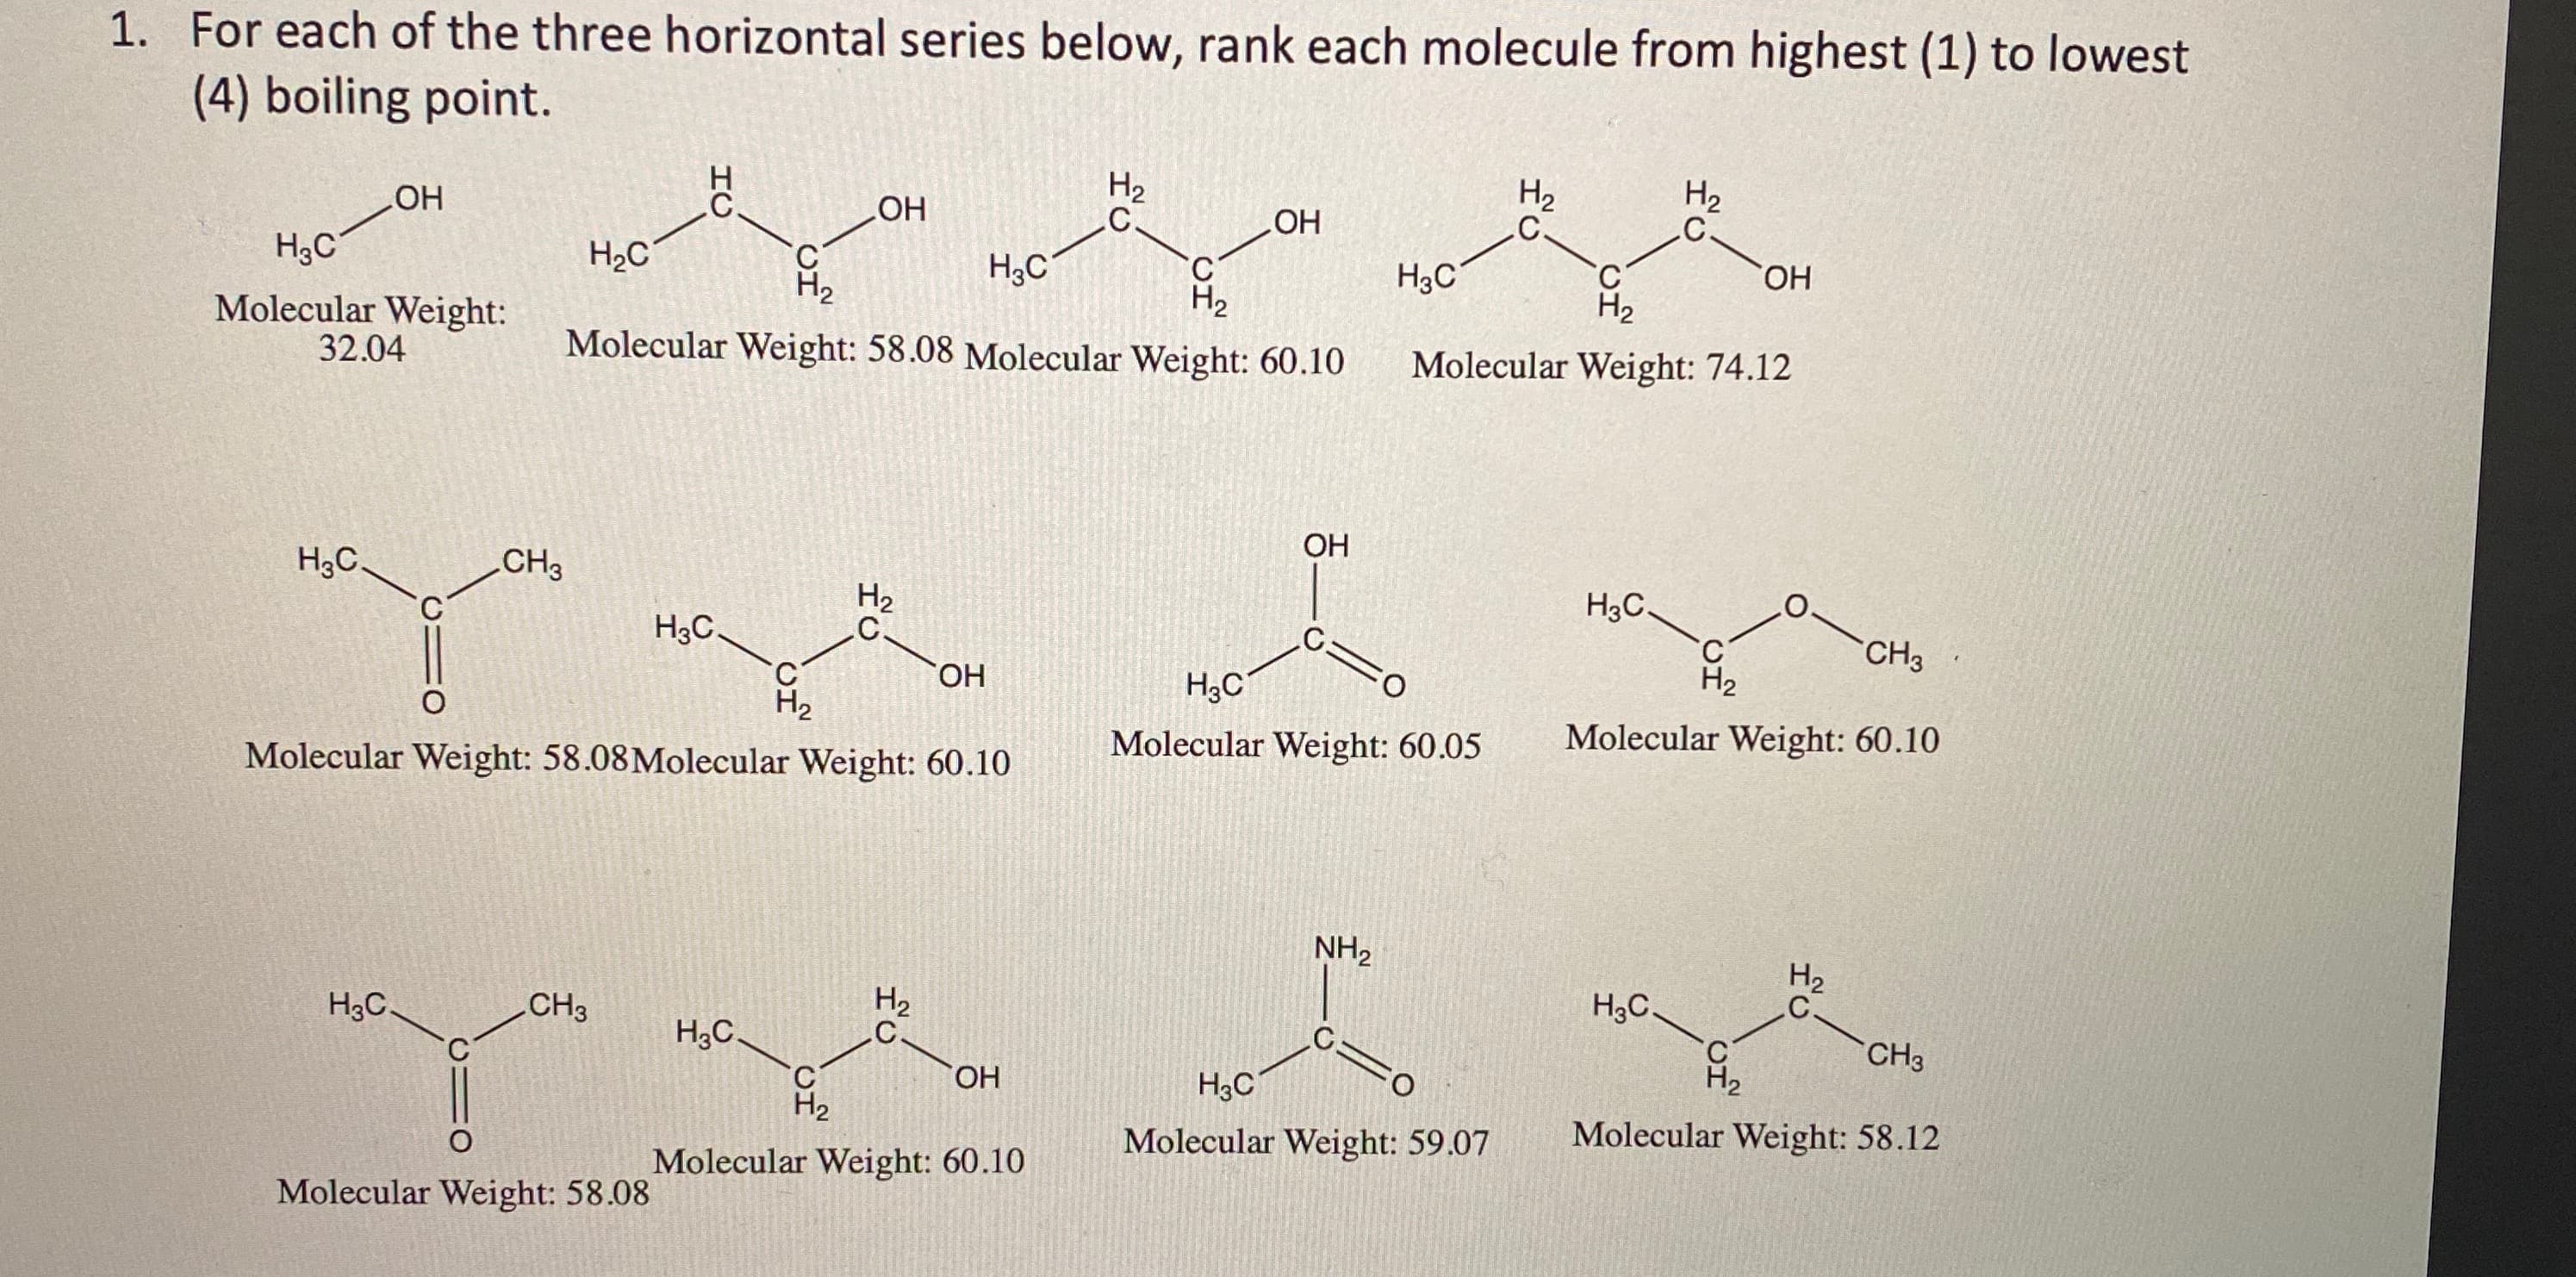 For each of the three horizontal series below, rank each molecule from highest (1) to lowest
(4) boiling point.
H2
H2
H2
.C.
HO
H3C
HO
H3C
HO,
C'
H2
HO
H3C
H2C
C.
H2
C.
H2
Molecular Weight:
32.04
Molecular Weight: 74.12
Molecular Weight: 58.08 Molecular Weight: 60.10
